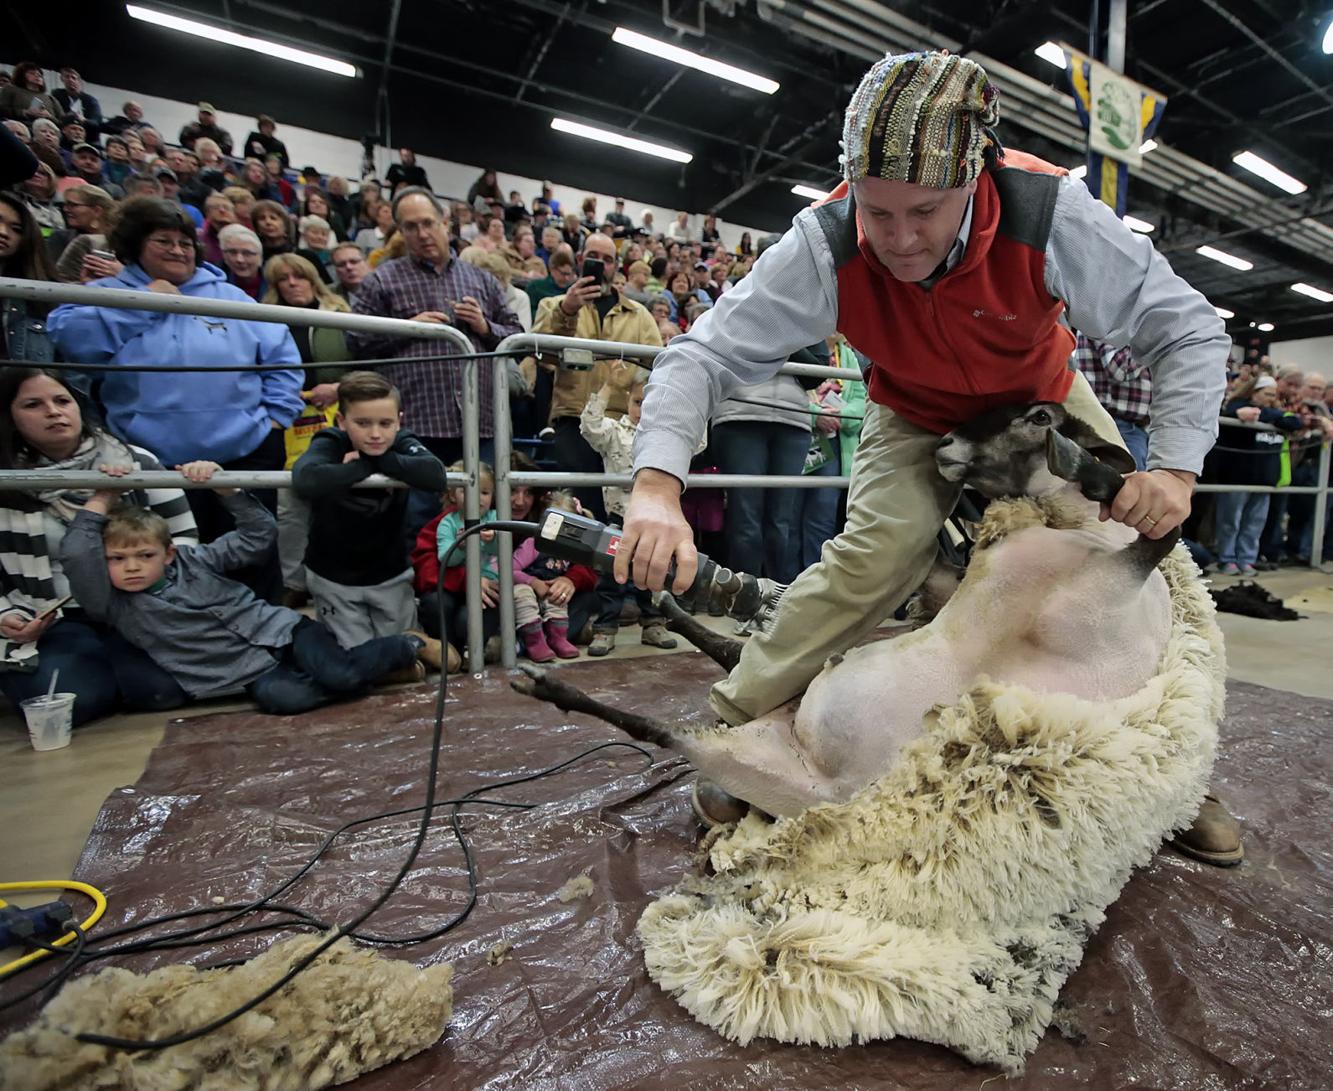 Pennsylvania Farm Show What is a sheep to shawl competition? [photos